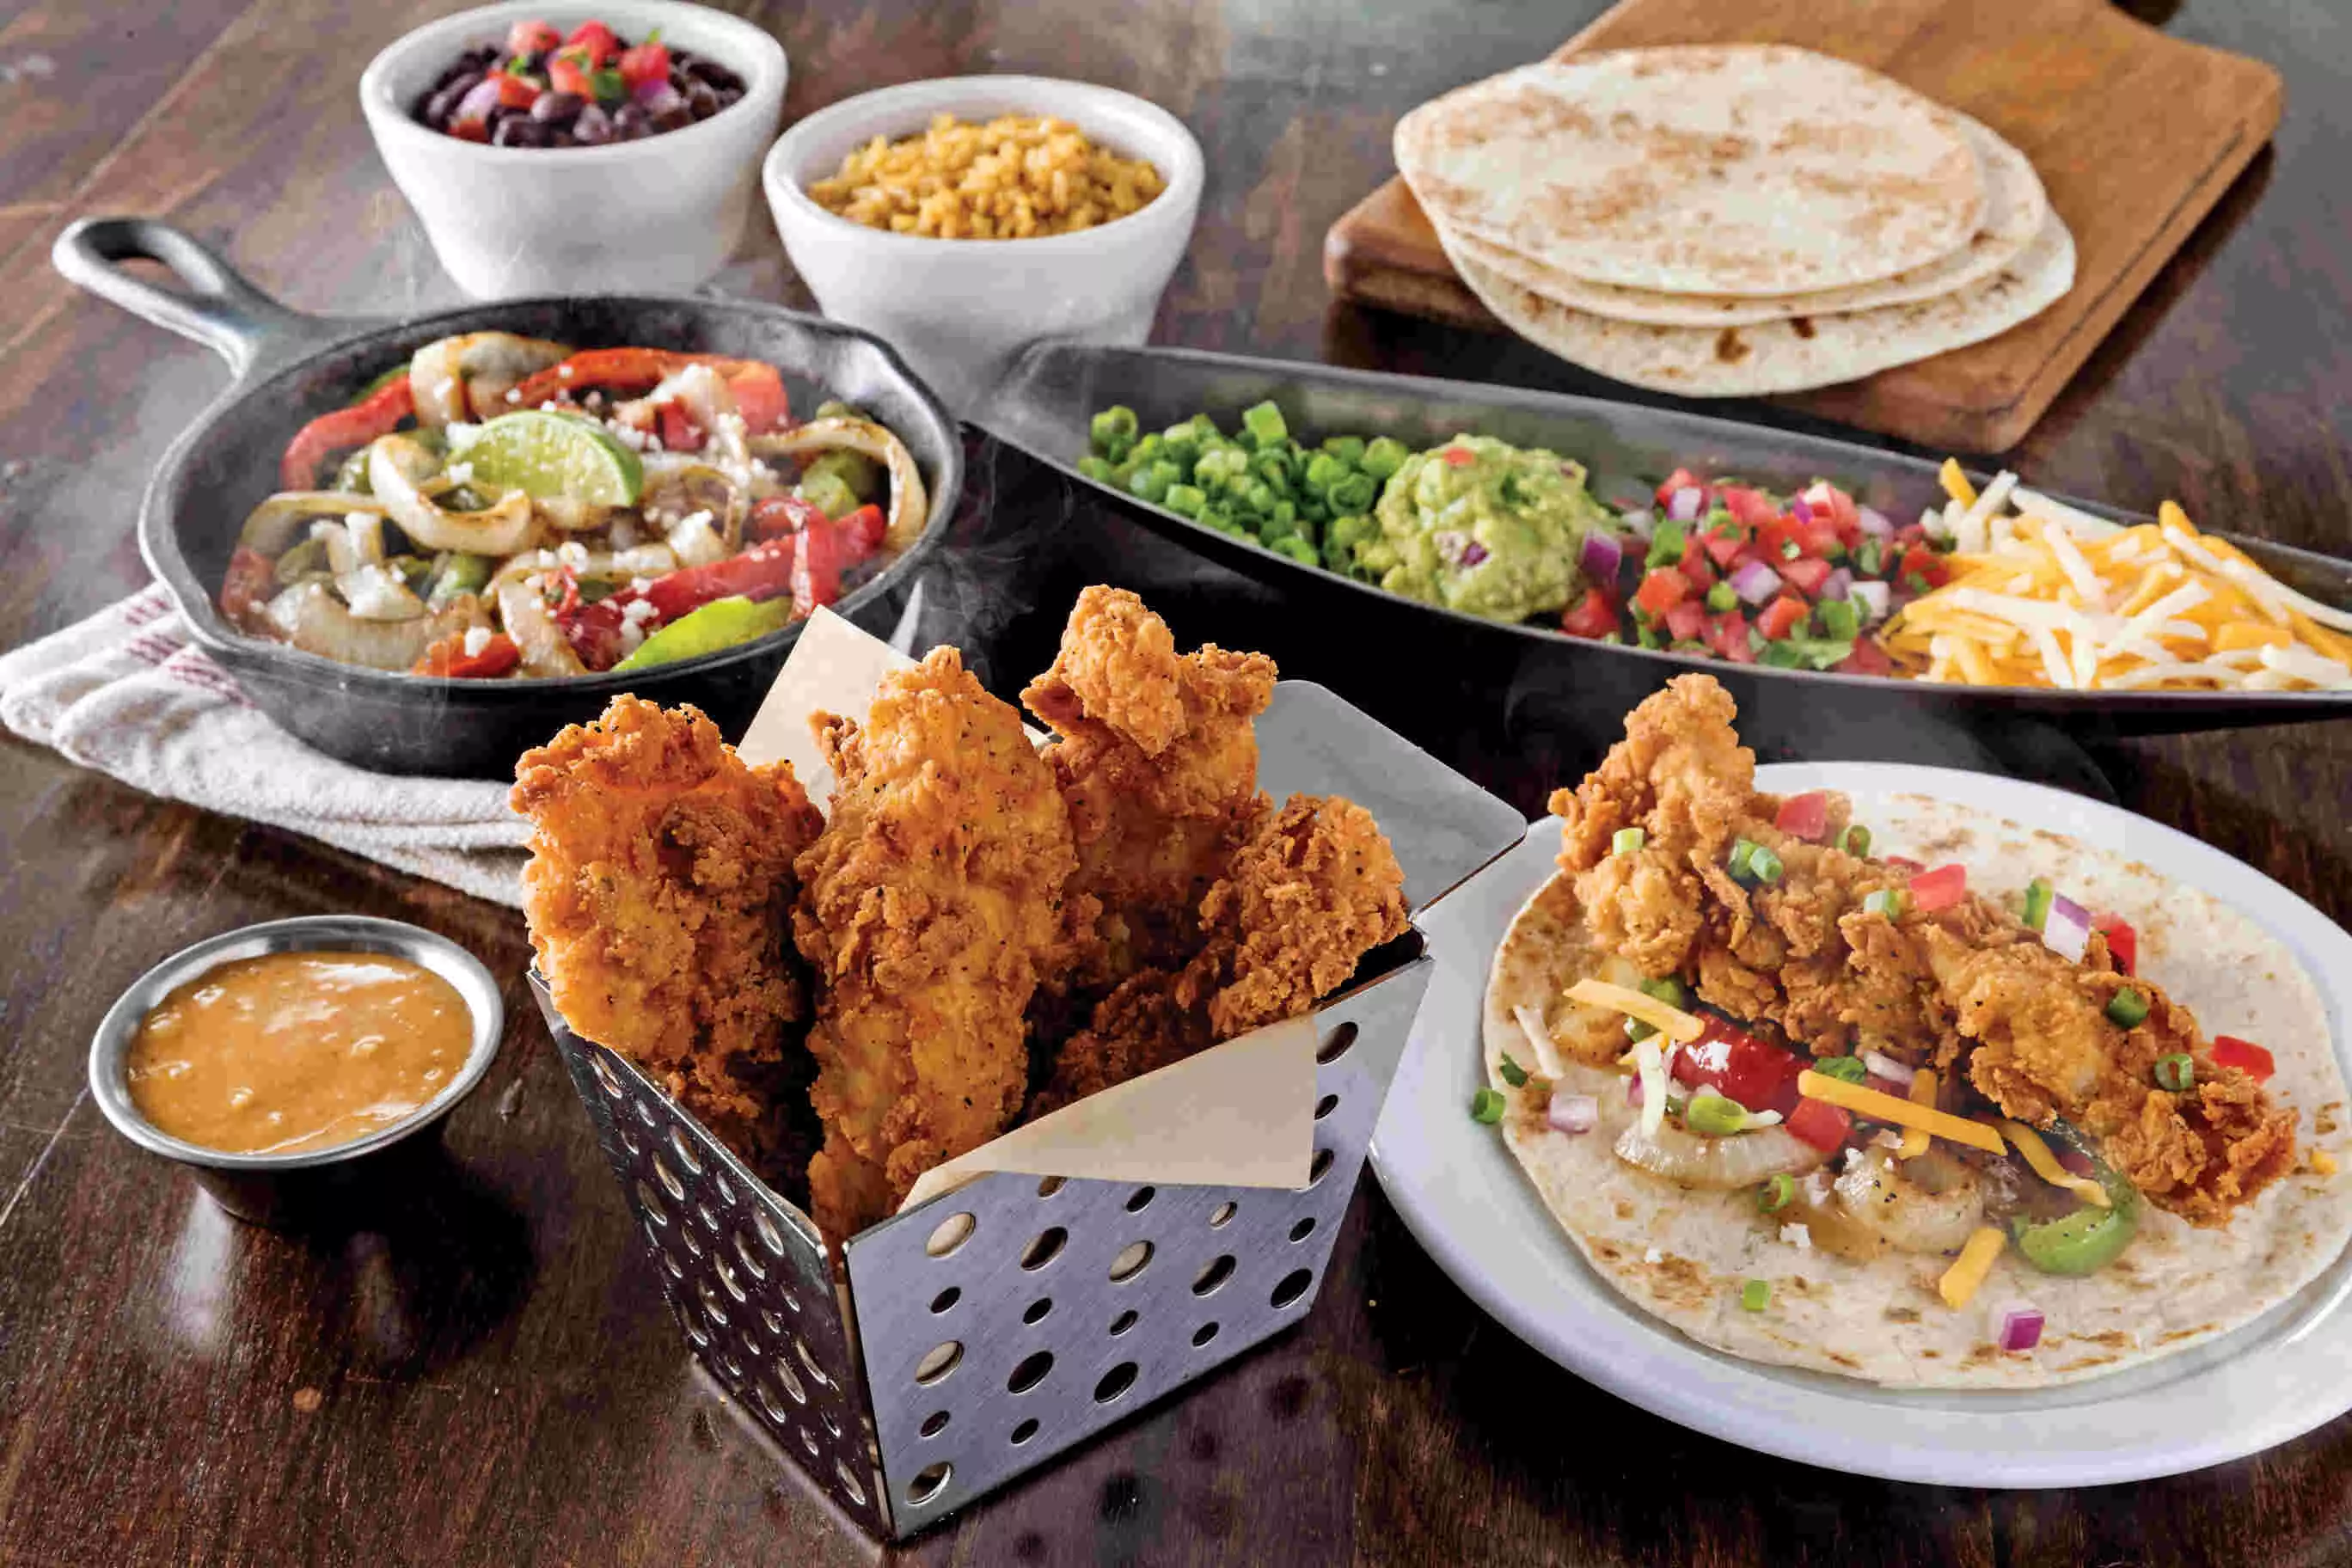 Chilis Grill & Bar opens its third outlet in Bengaluru at Lulu Mall